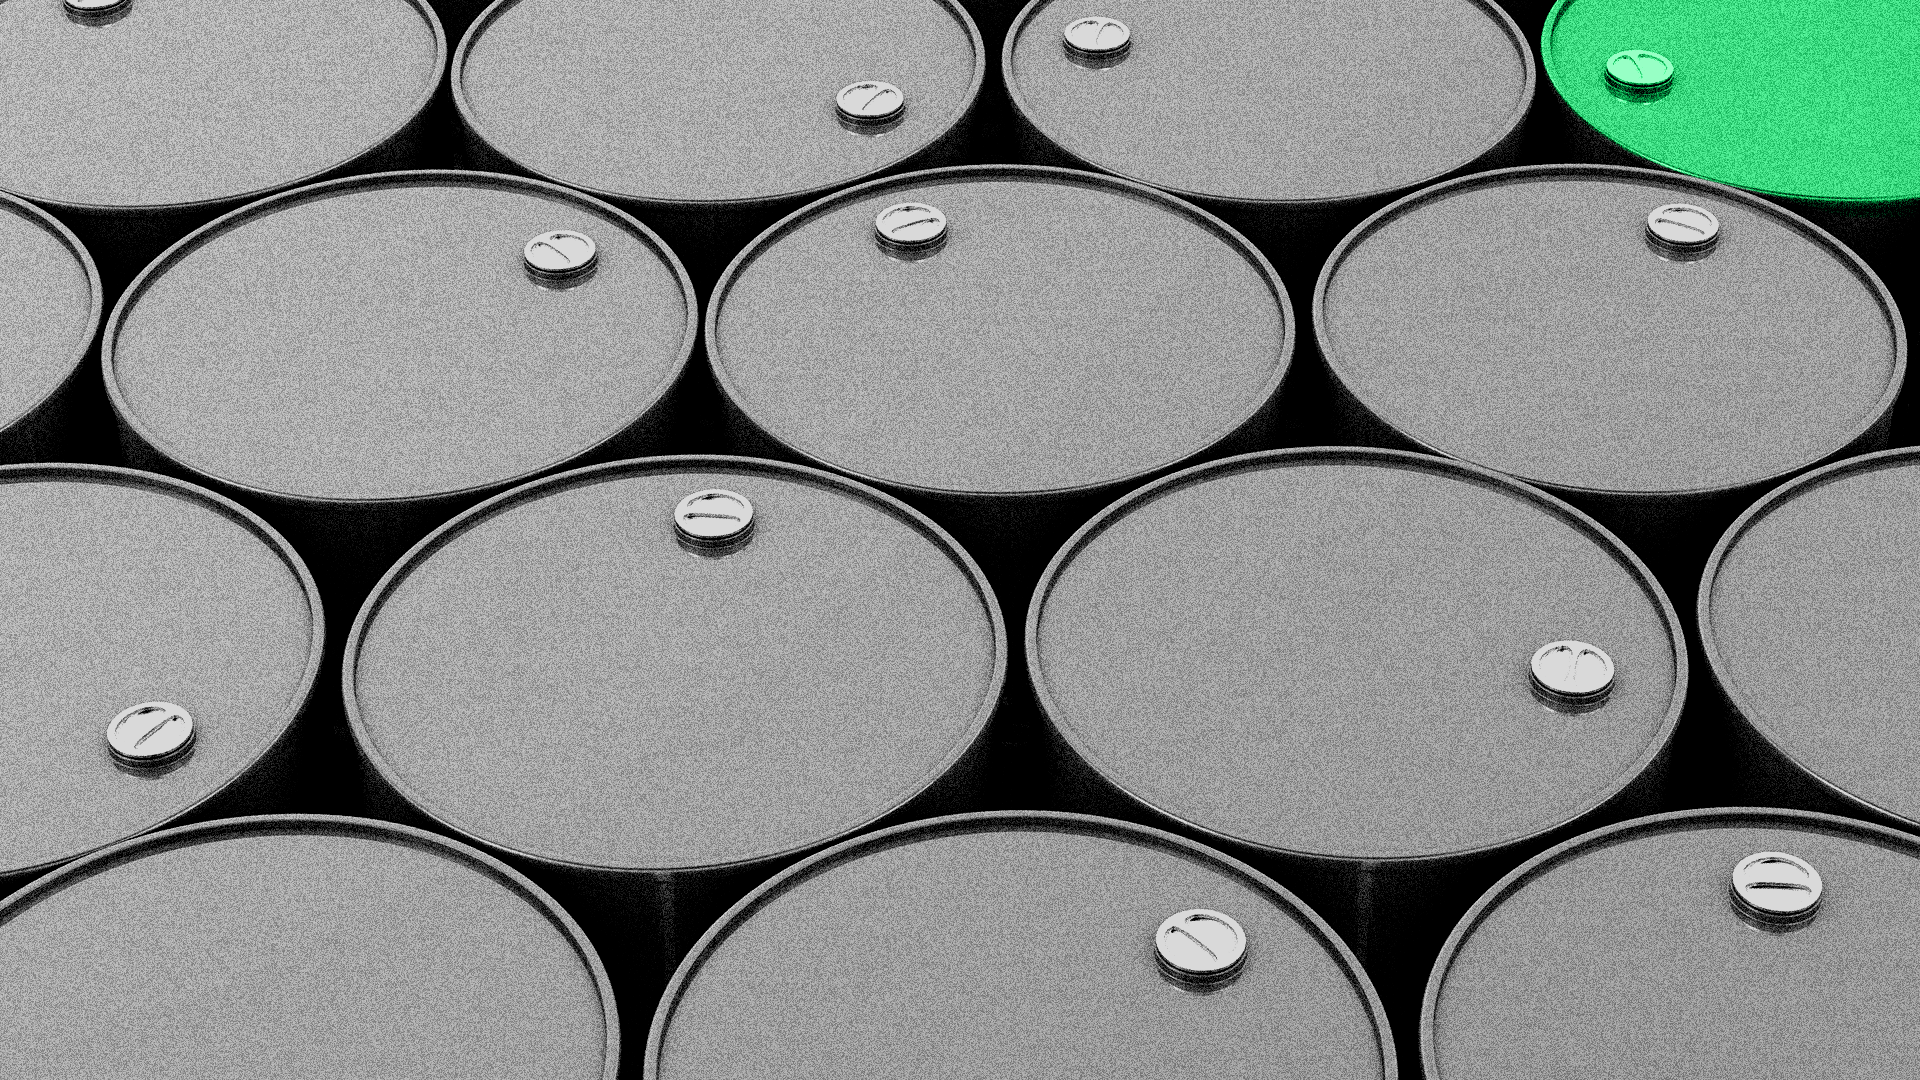 Illustration of many oil barrels and one of them turning green